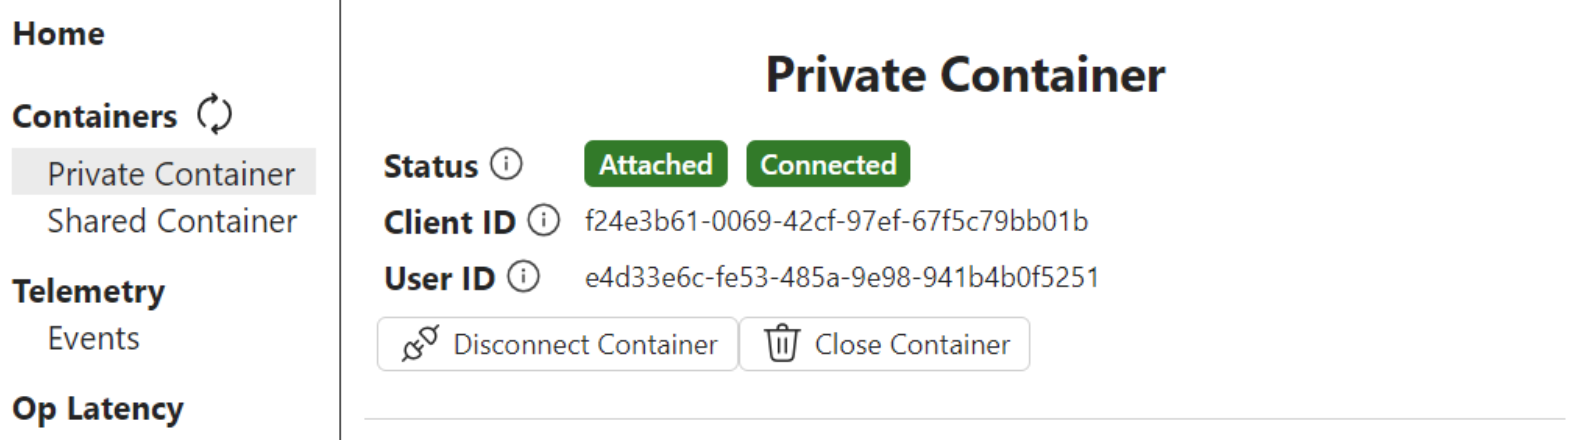 A screenshot showing container information